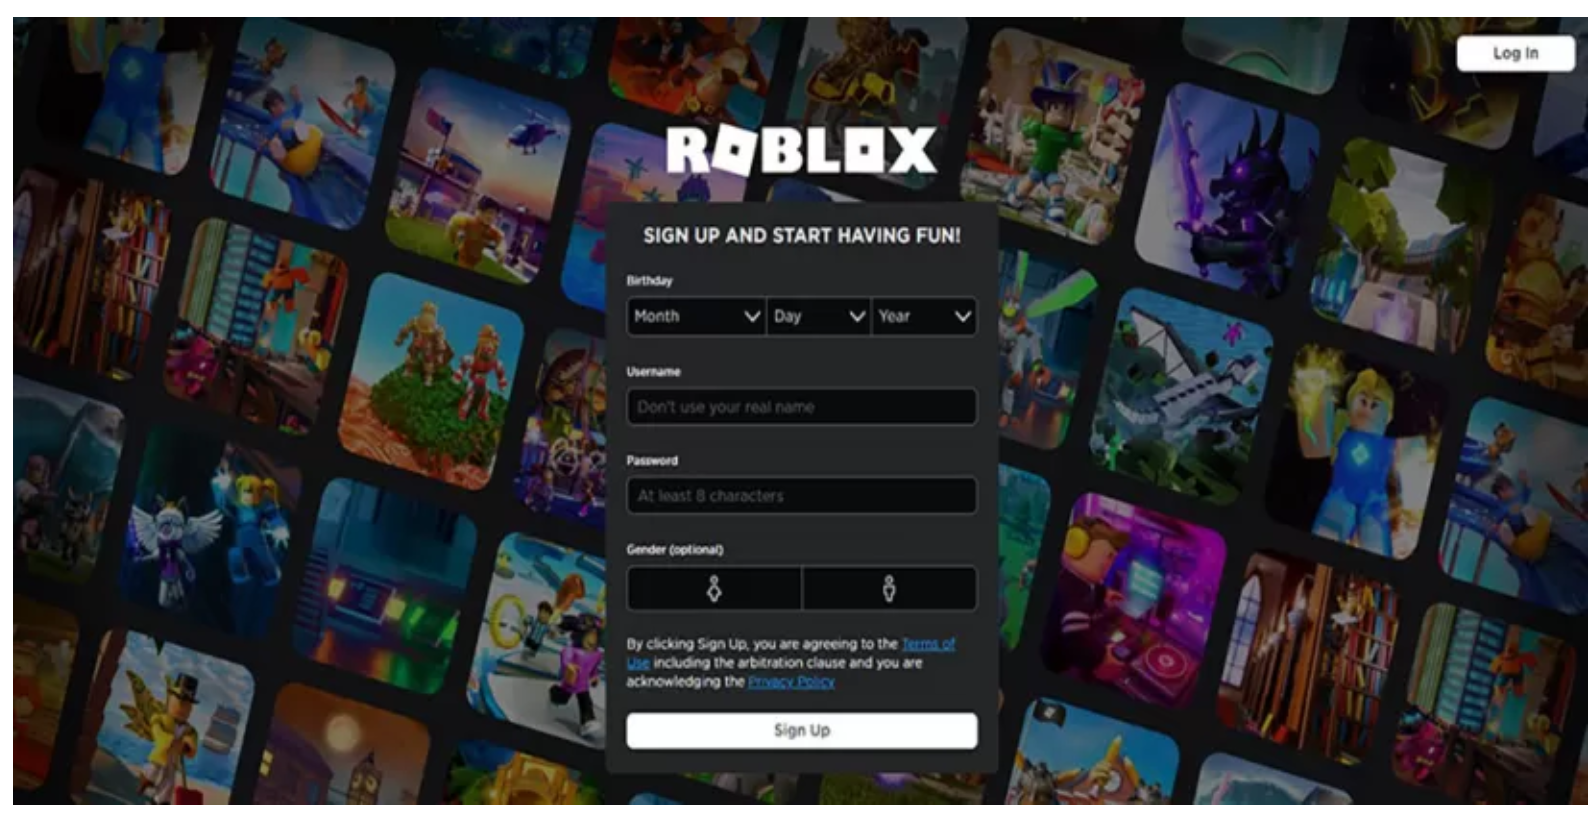 ROBLOX Login | How To Login To Your ROBLOX Account On Mobile And PC On Roblox.Com